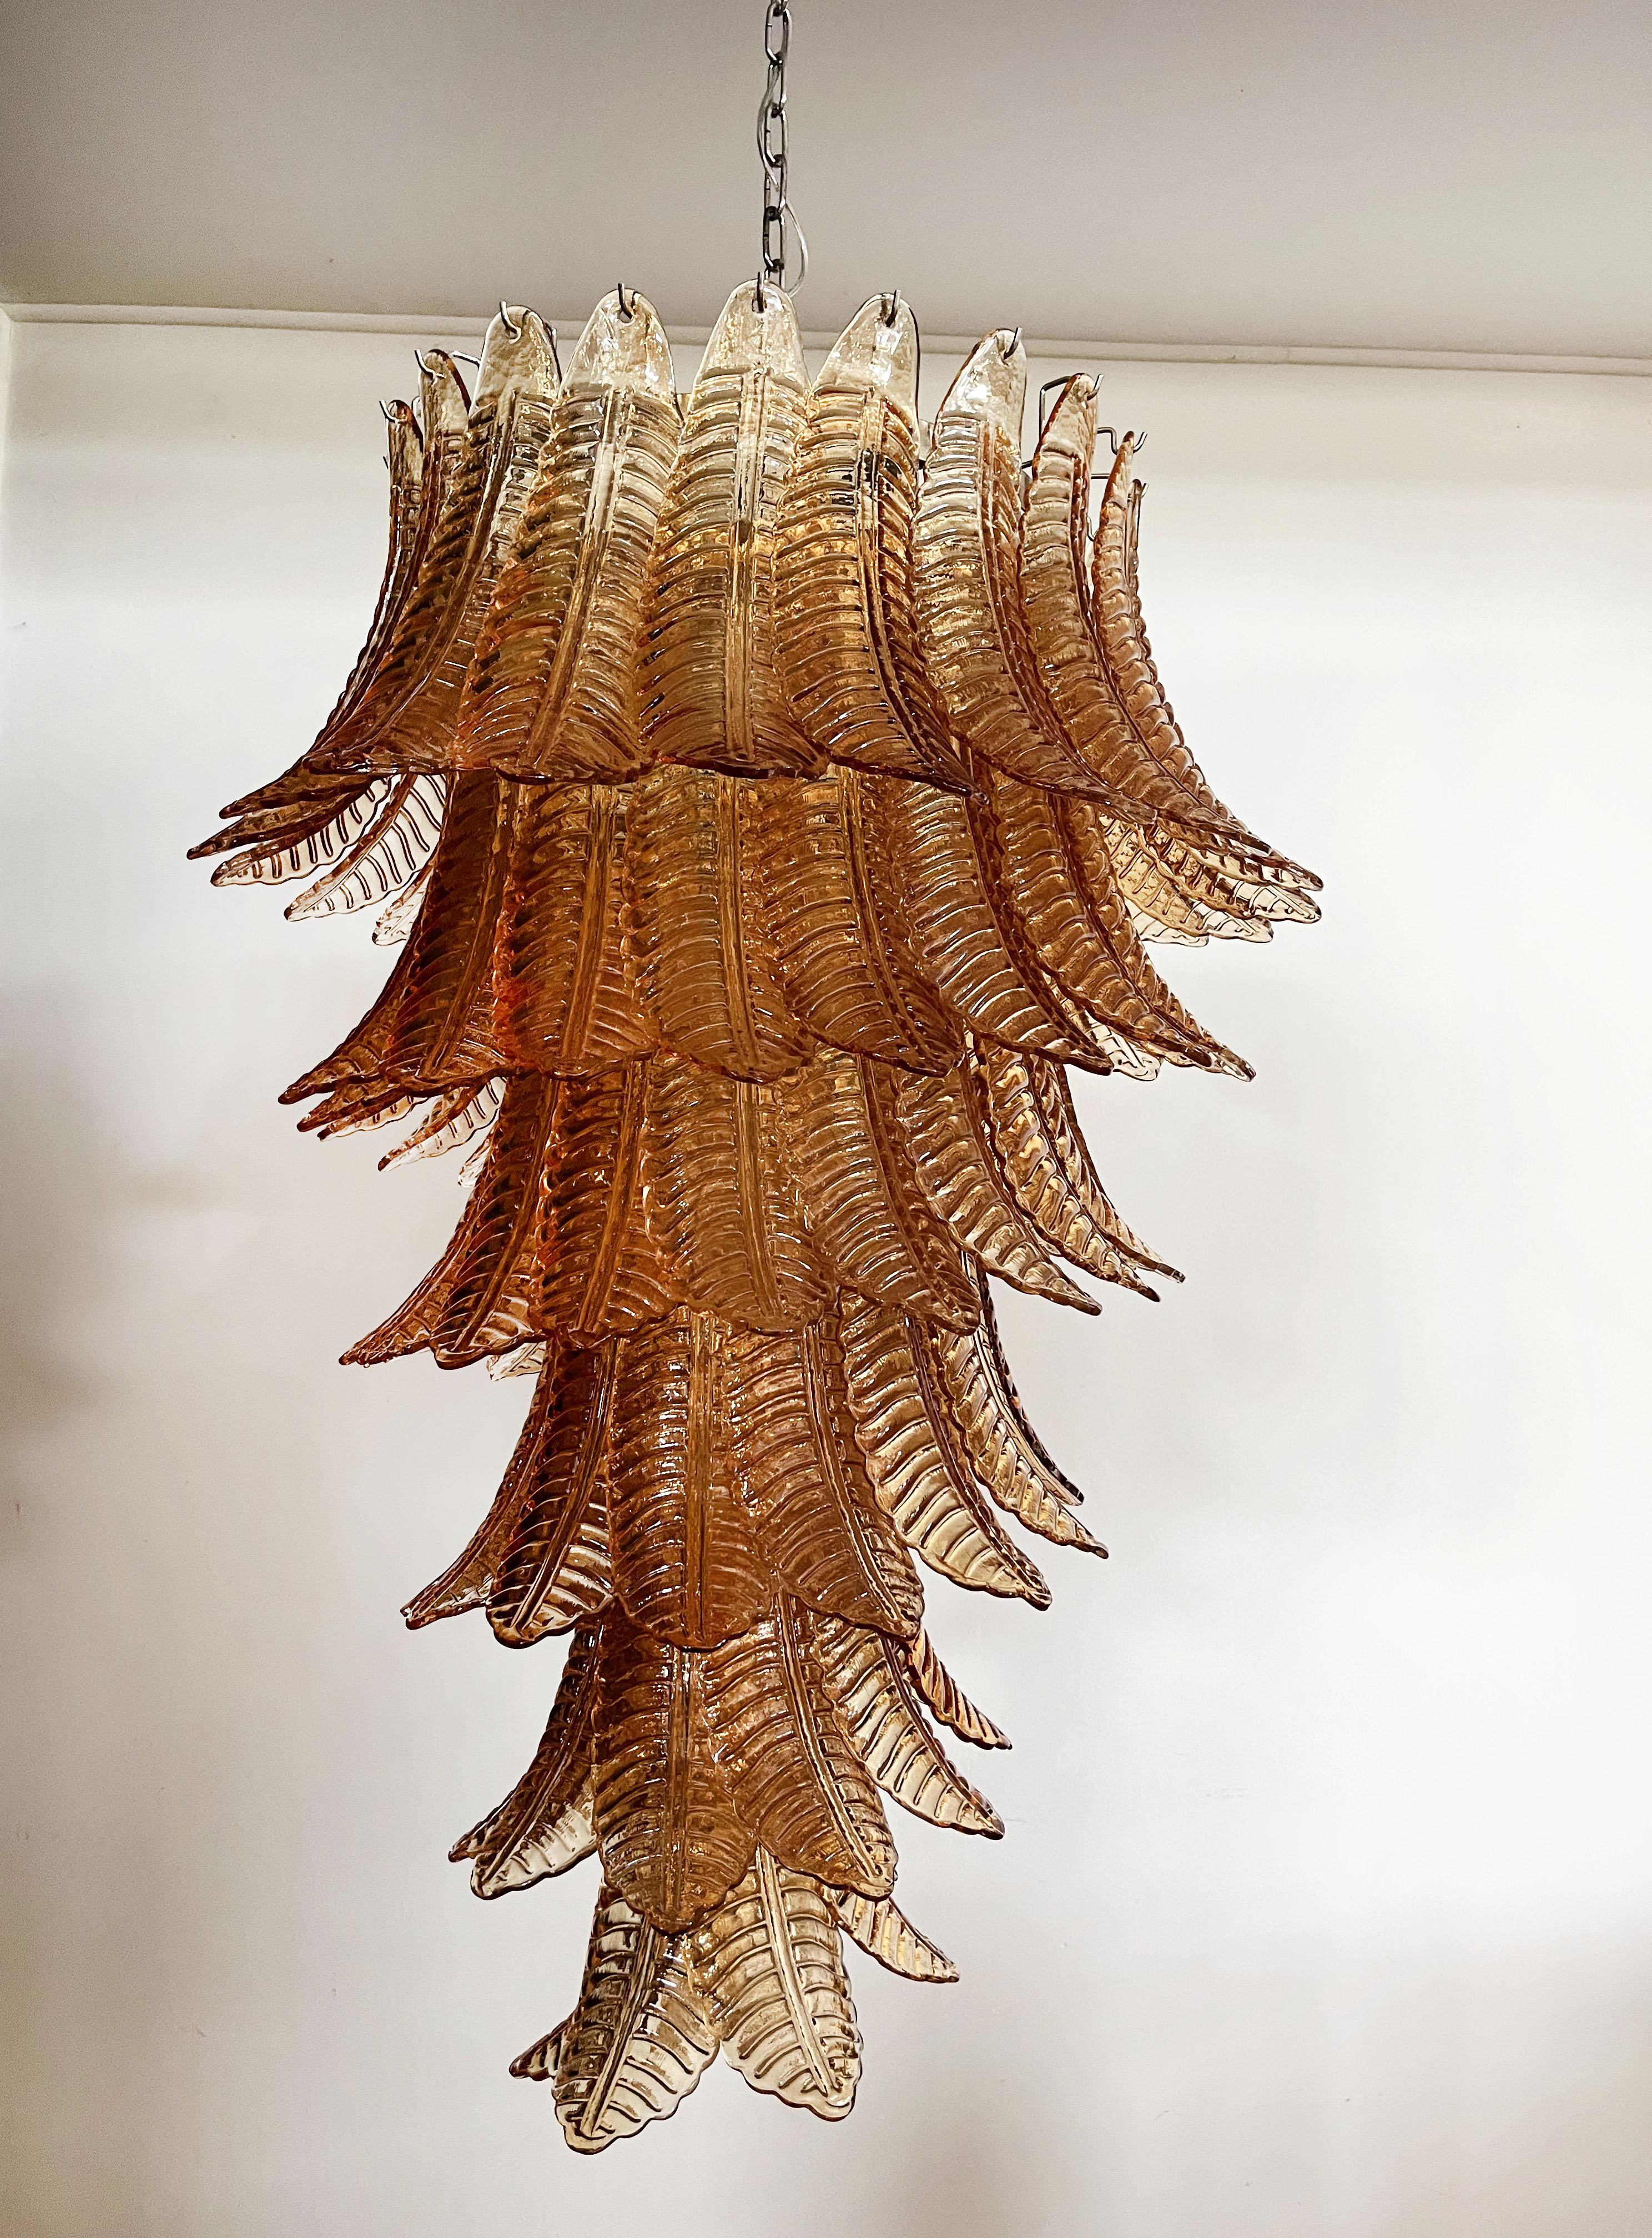 Beautiful and huge Italian Murano Chandelier composed of 83 splendid amber glasses that give a very elegant look. The glasses of this chandelier are real works of art. The glasses descend with a spiral shape.
Dimensions: 71,70 inches (185 cm)